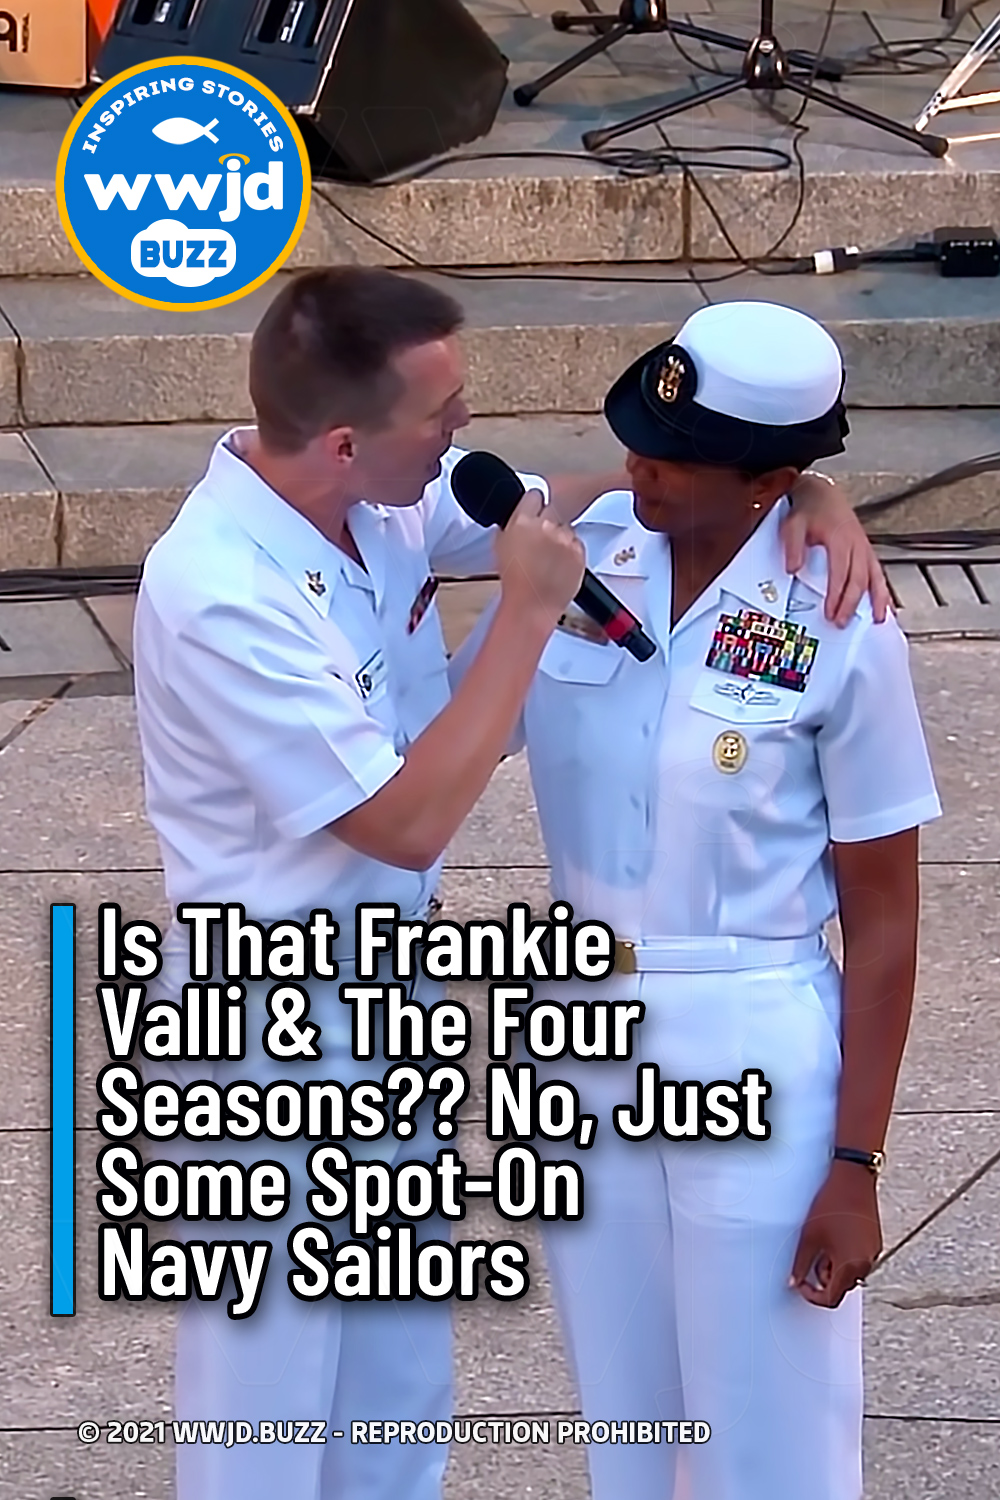 Is That Frankie Valli & The Four Seasons?? No, Just Some Spot-On Navy Sailors